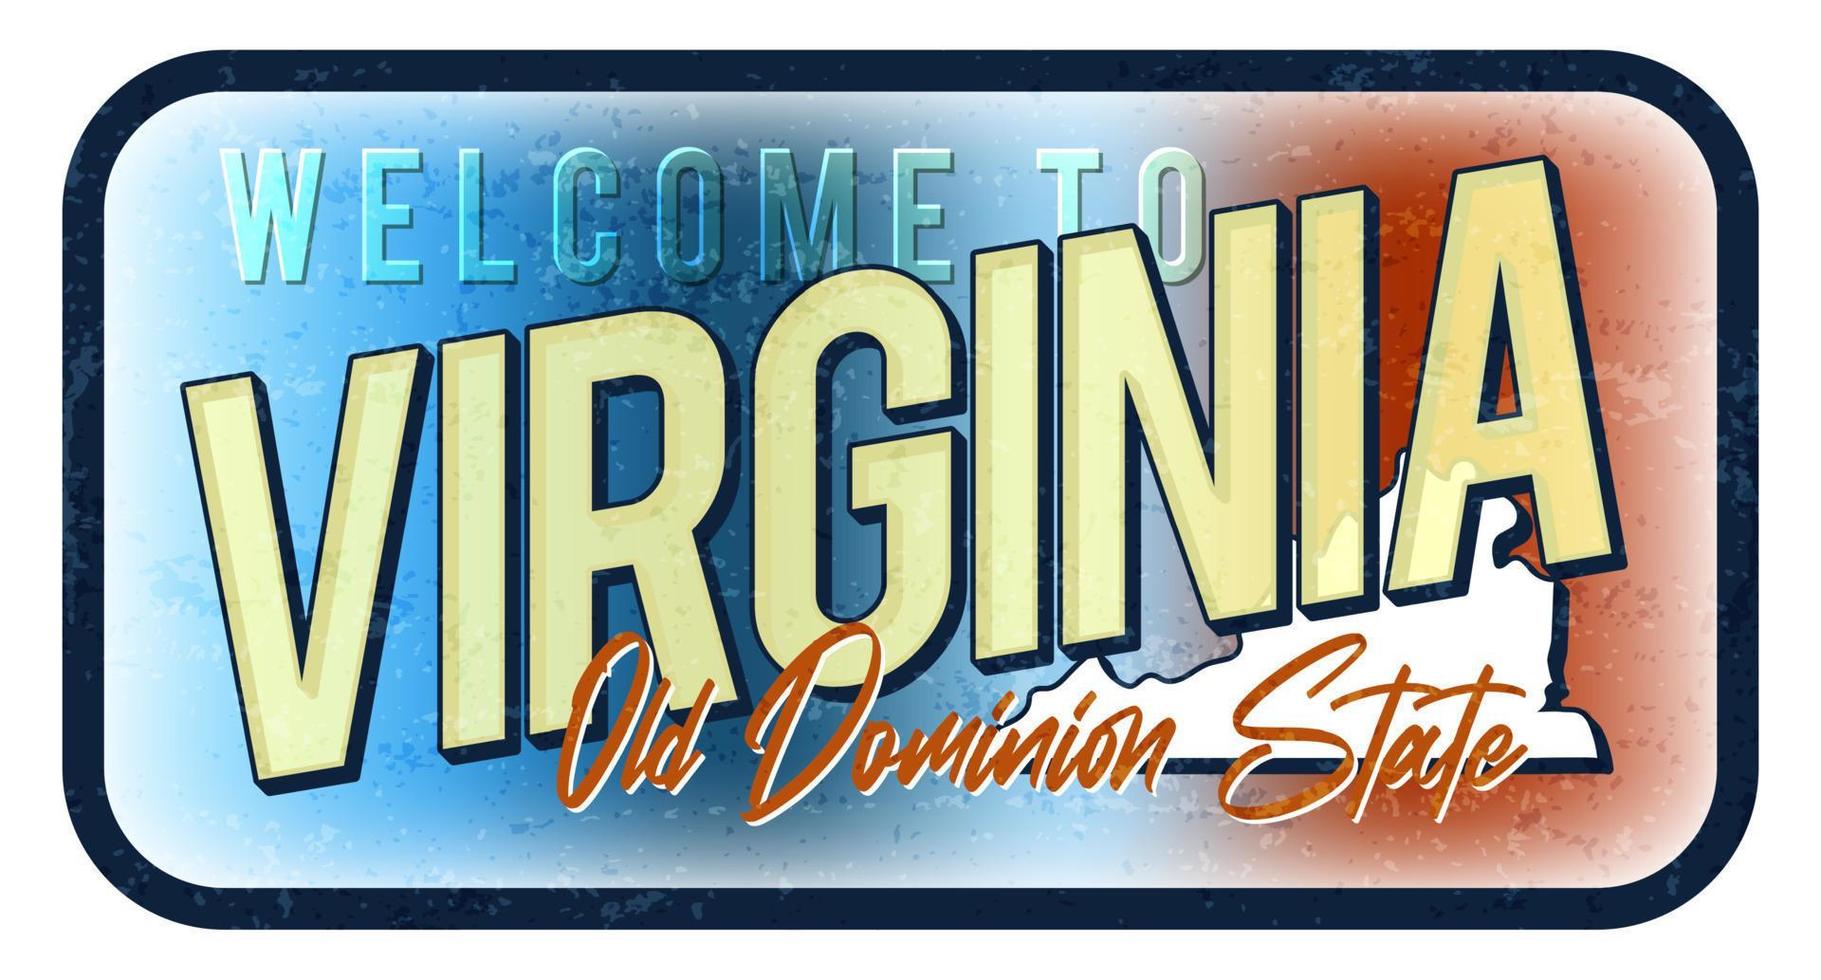 Welcome to virginia vintage rusty metal sign vector illustration. Vector state map in grunge style with Typography hand drawn lettering.